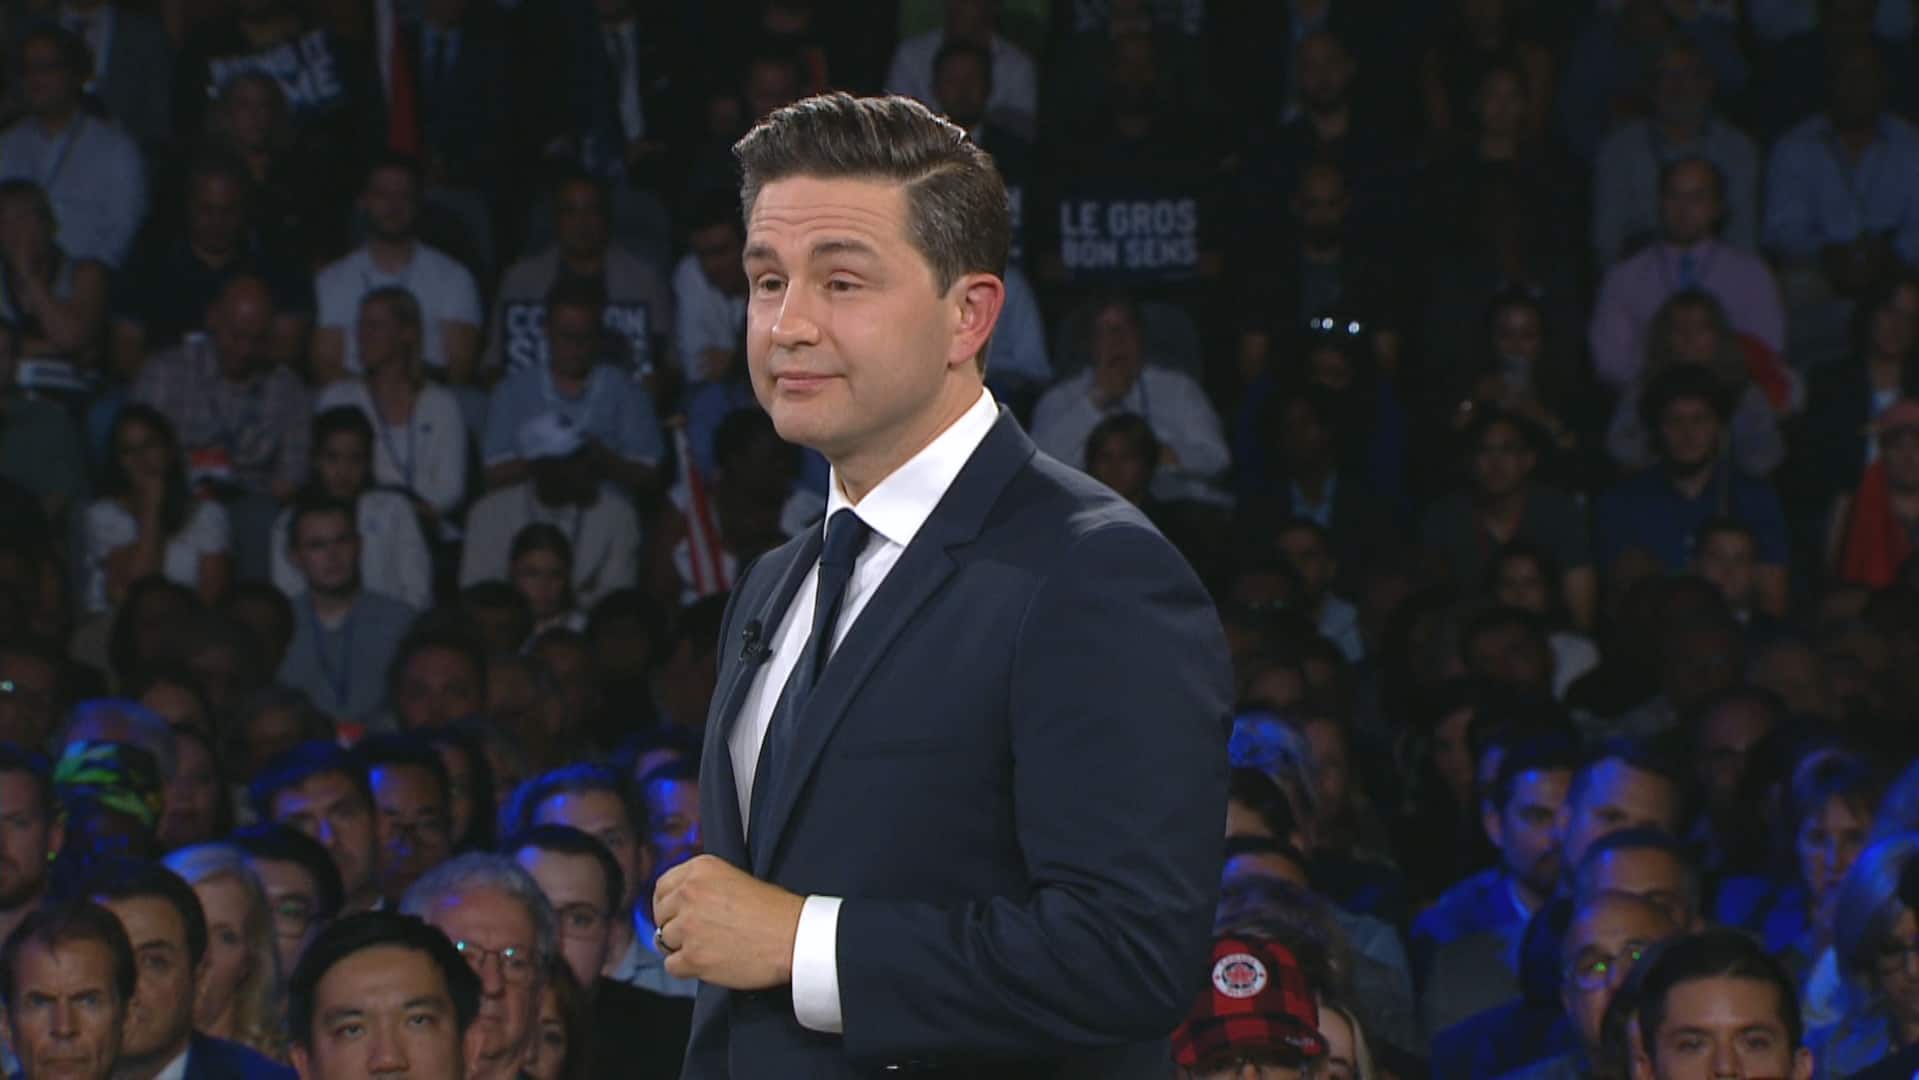 Poilievre references the fiscal records of former Liberal prime ministers in his speech at the Conservative convention.